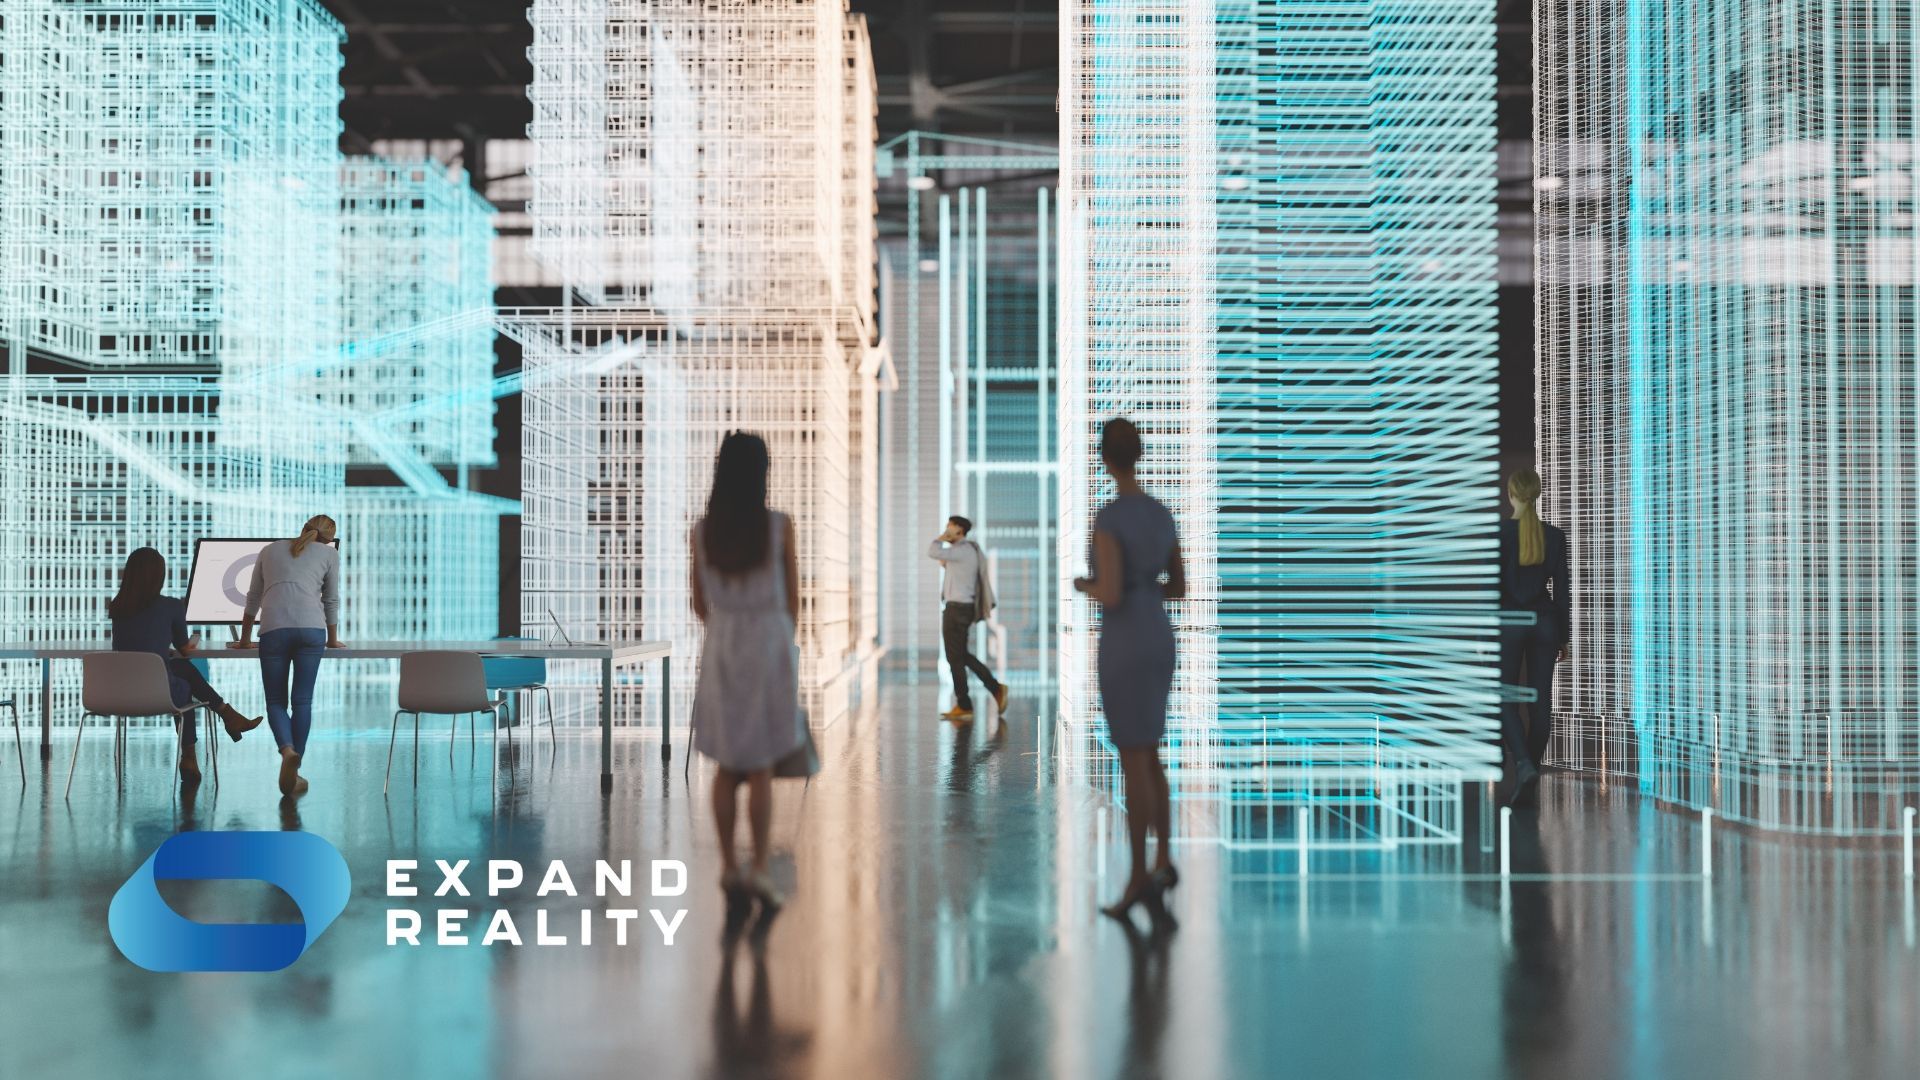 If you're an AEC professional, you may have heard of building information modelling (BIM). Learn why extended reality could be the key to its future.